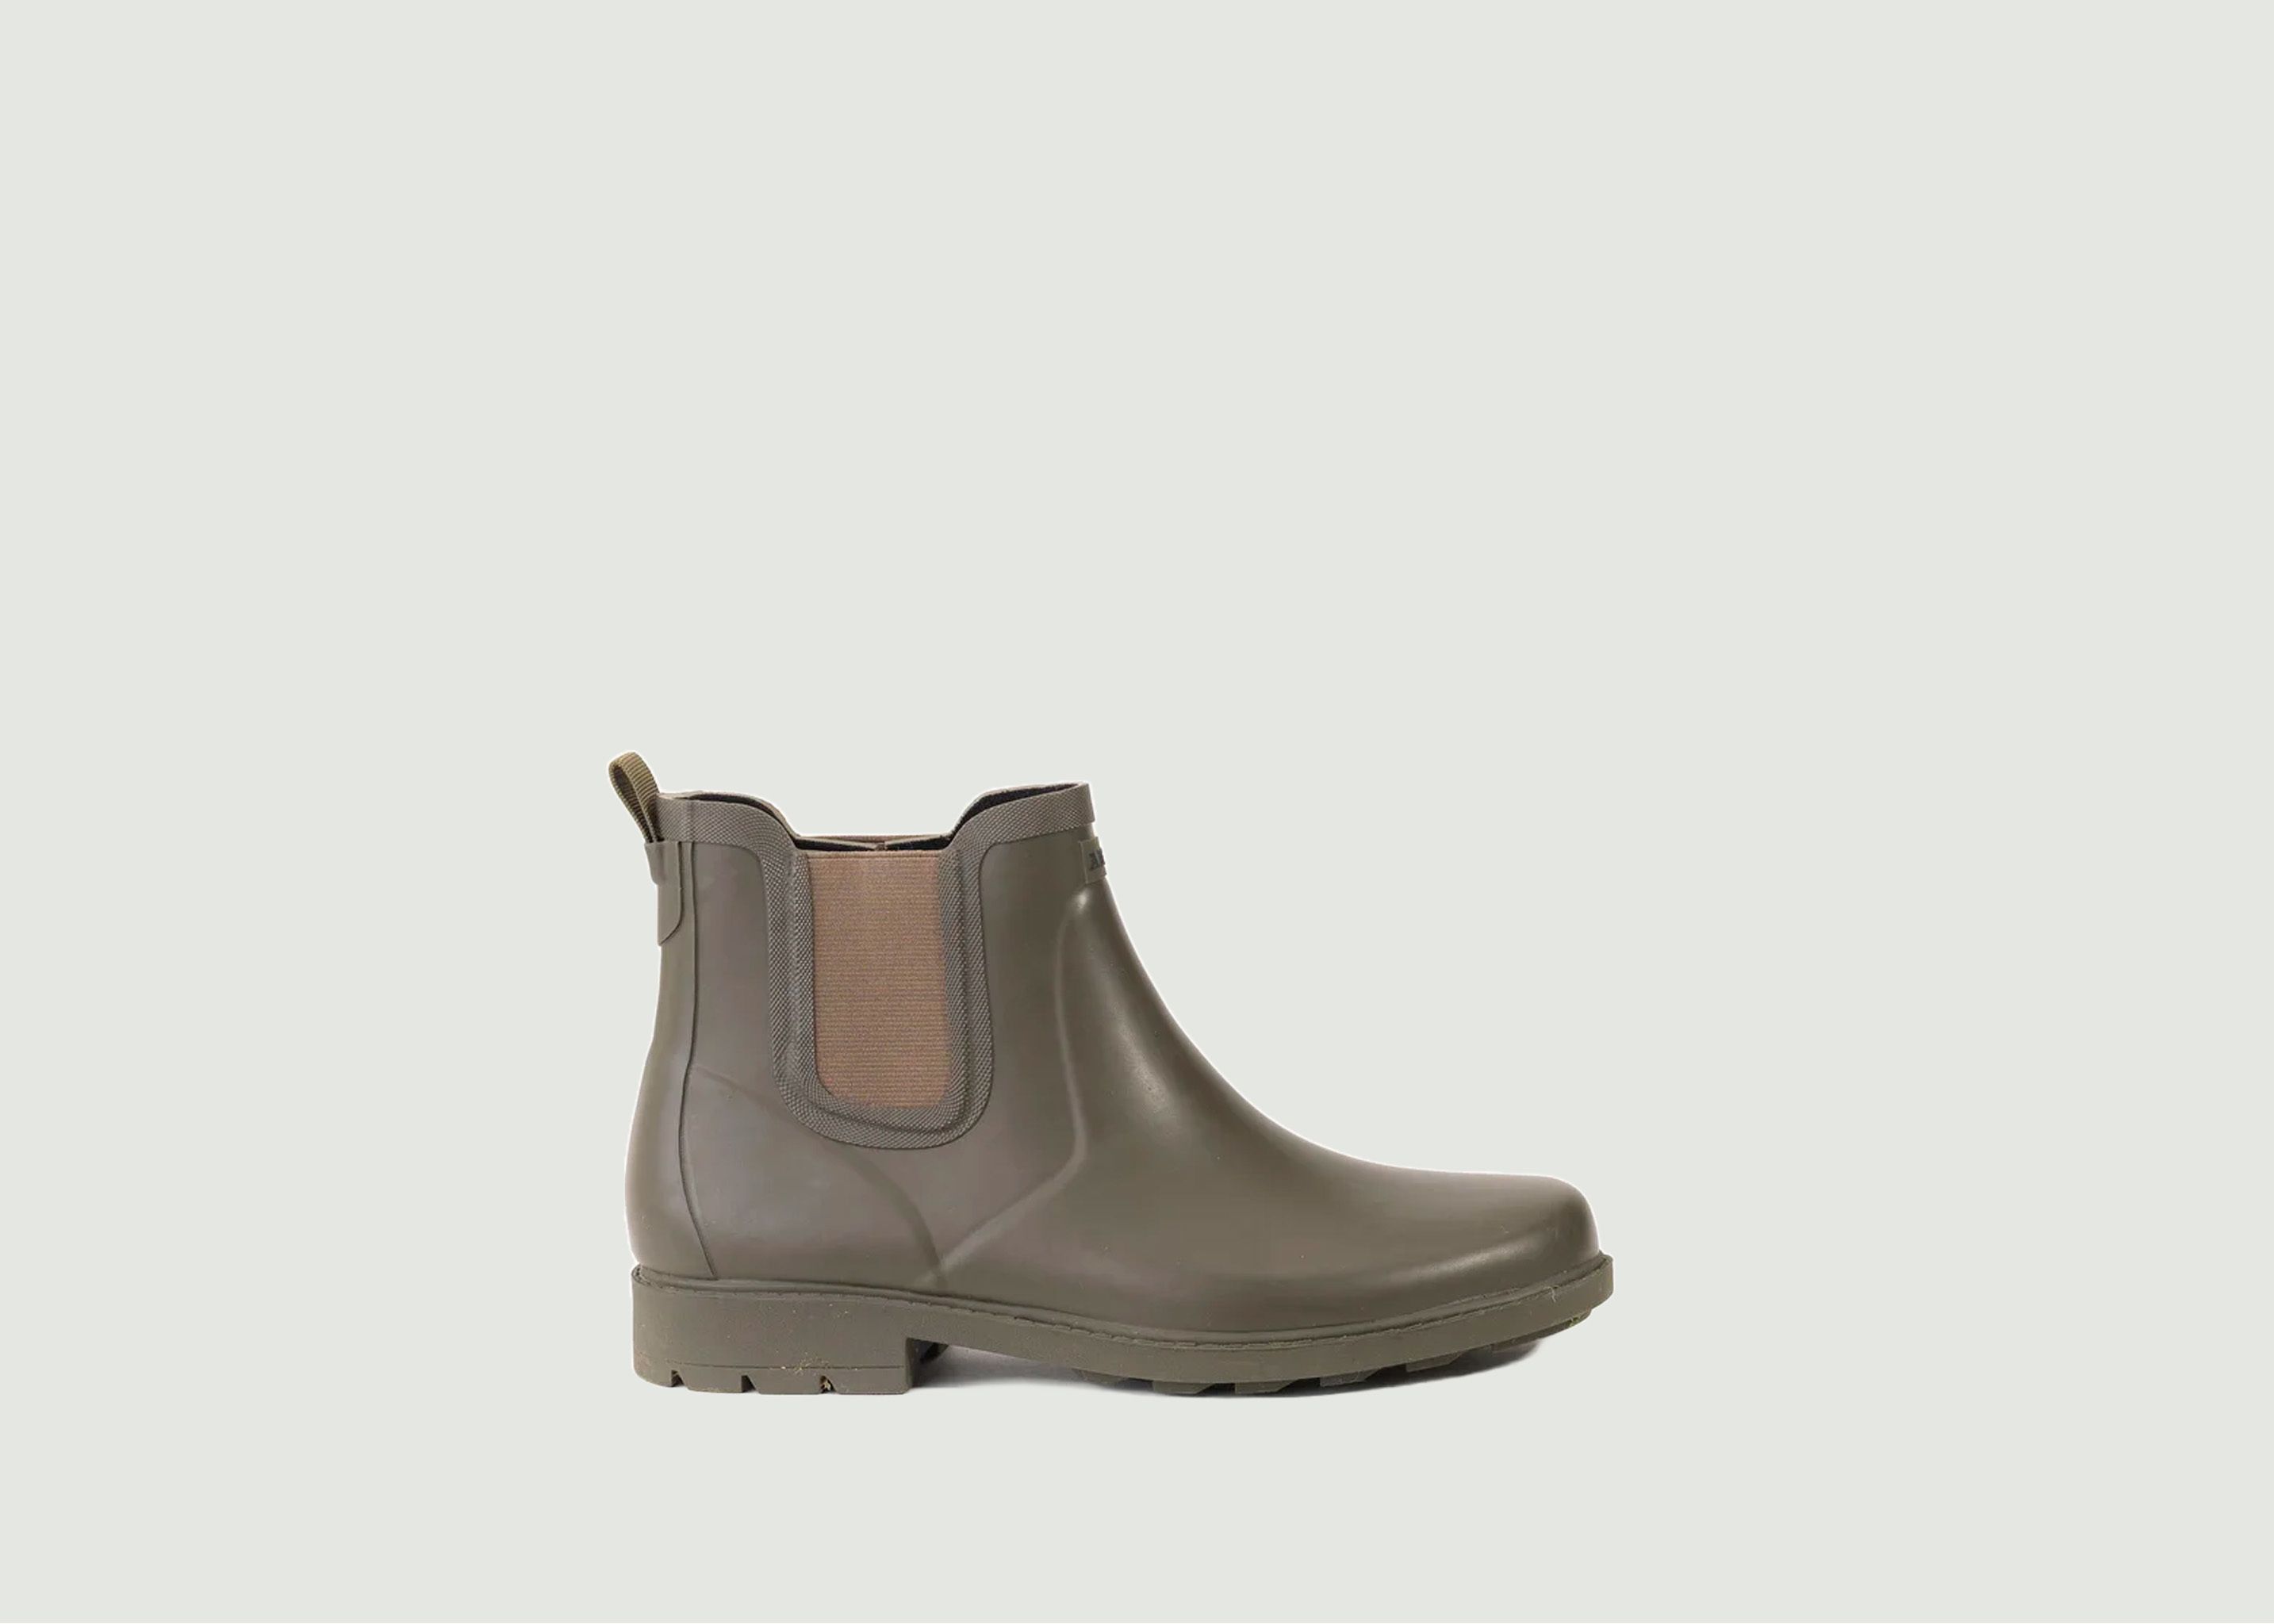 Carville boots - Aigle